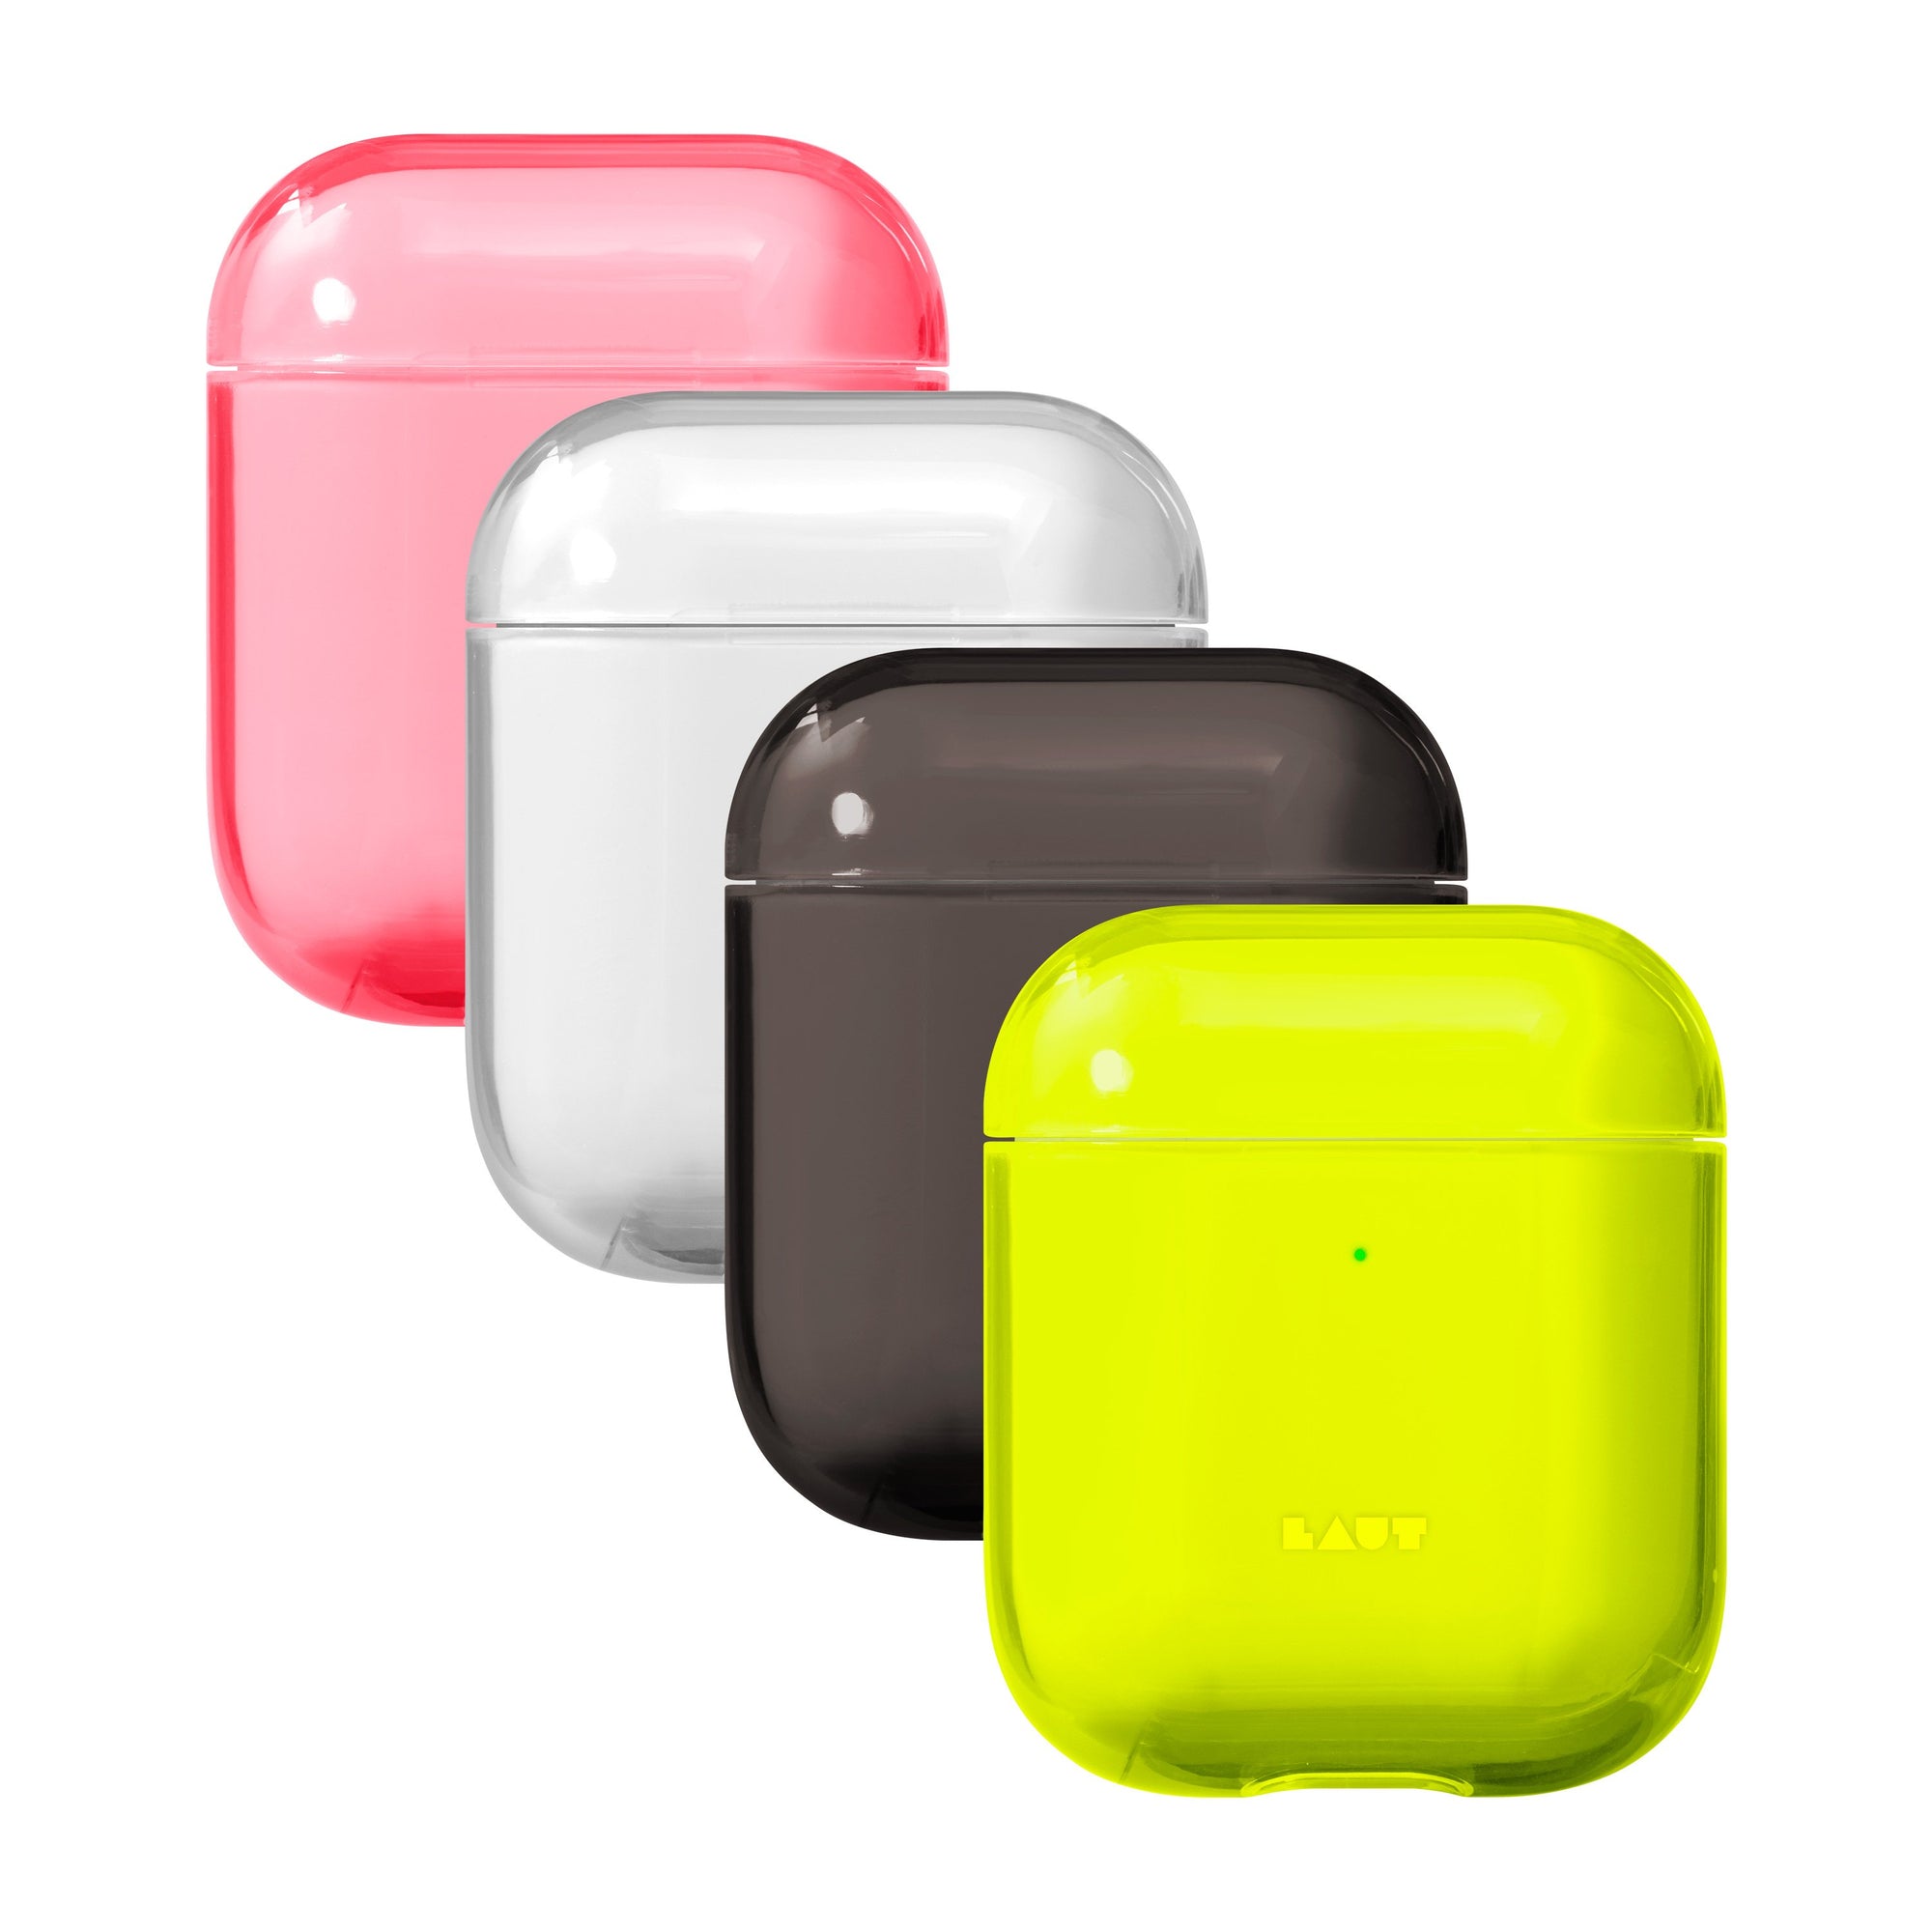 CRYSTAL-X for AirPods - LAUT Japan